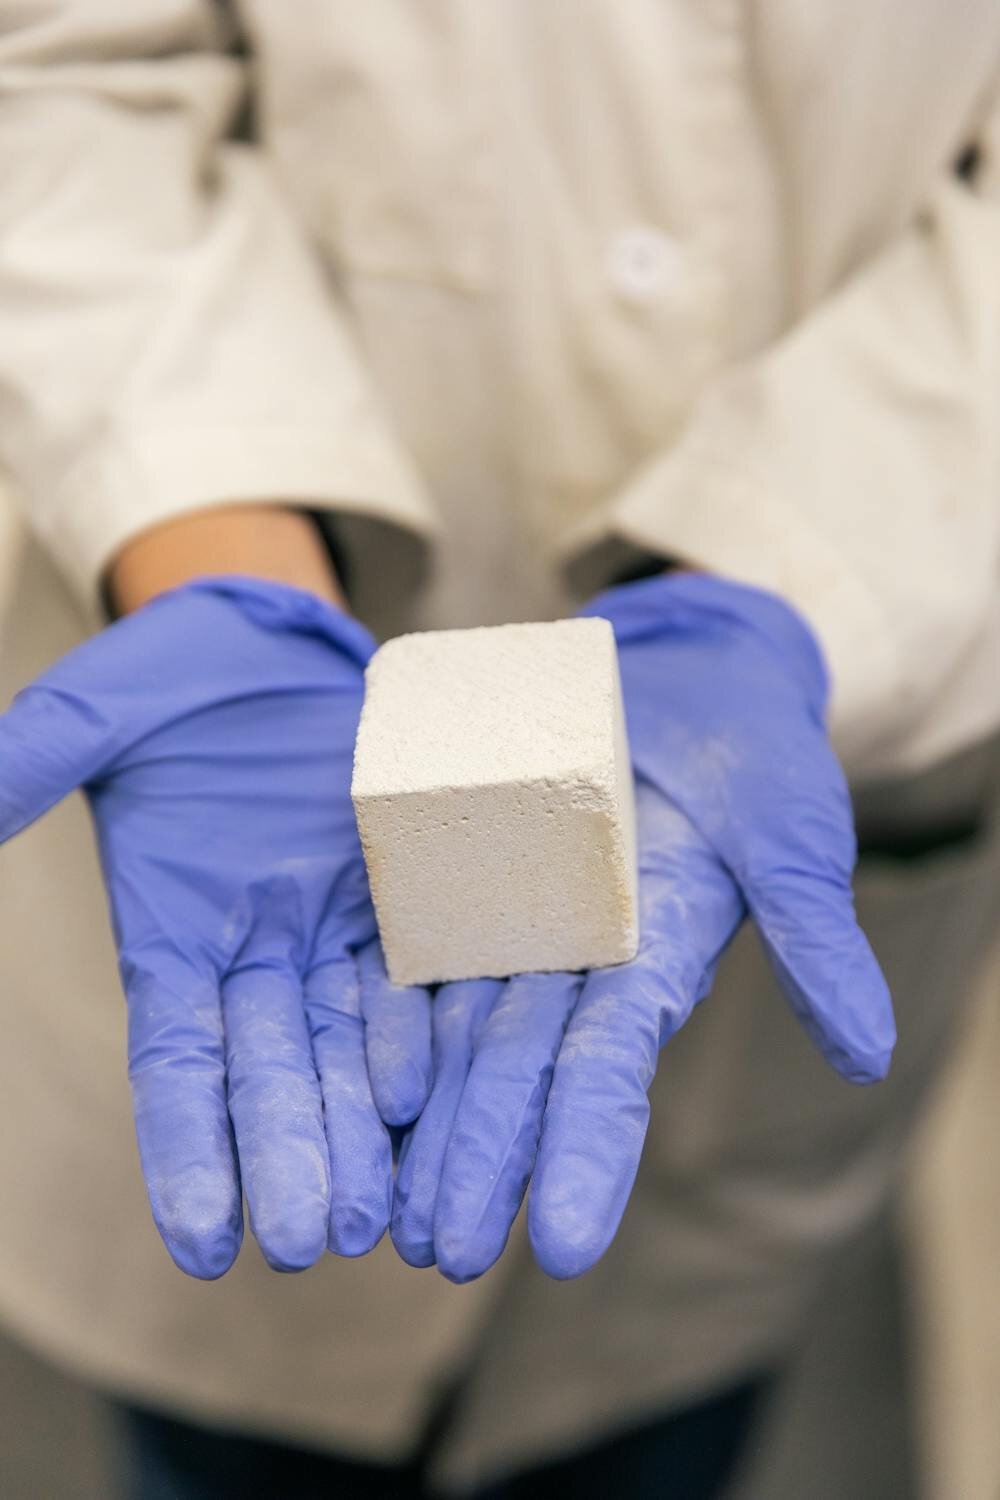 Green cement production is scaling up—and it could cut the carbon footprint of construction